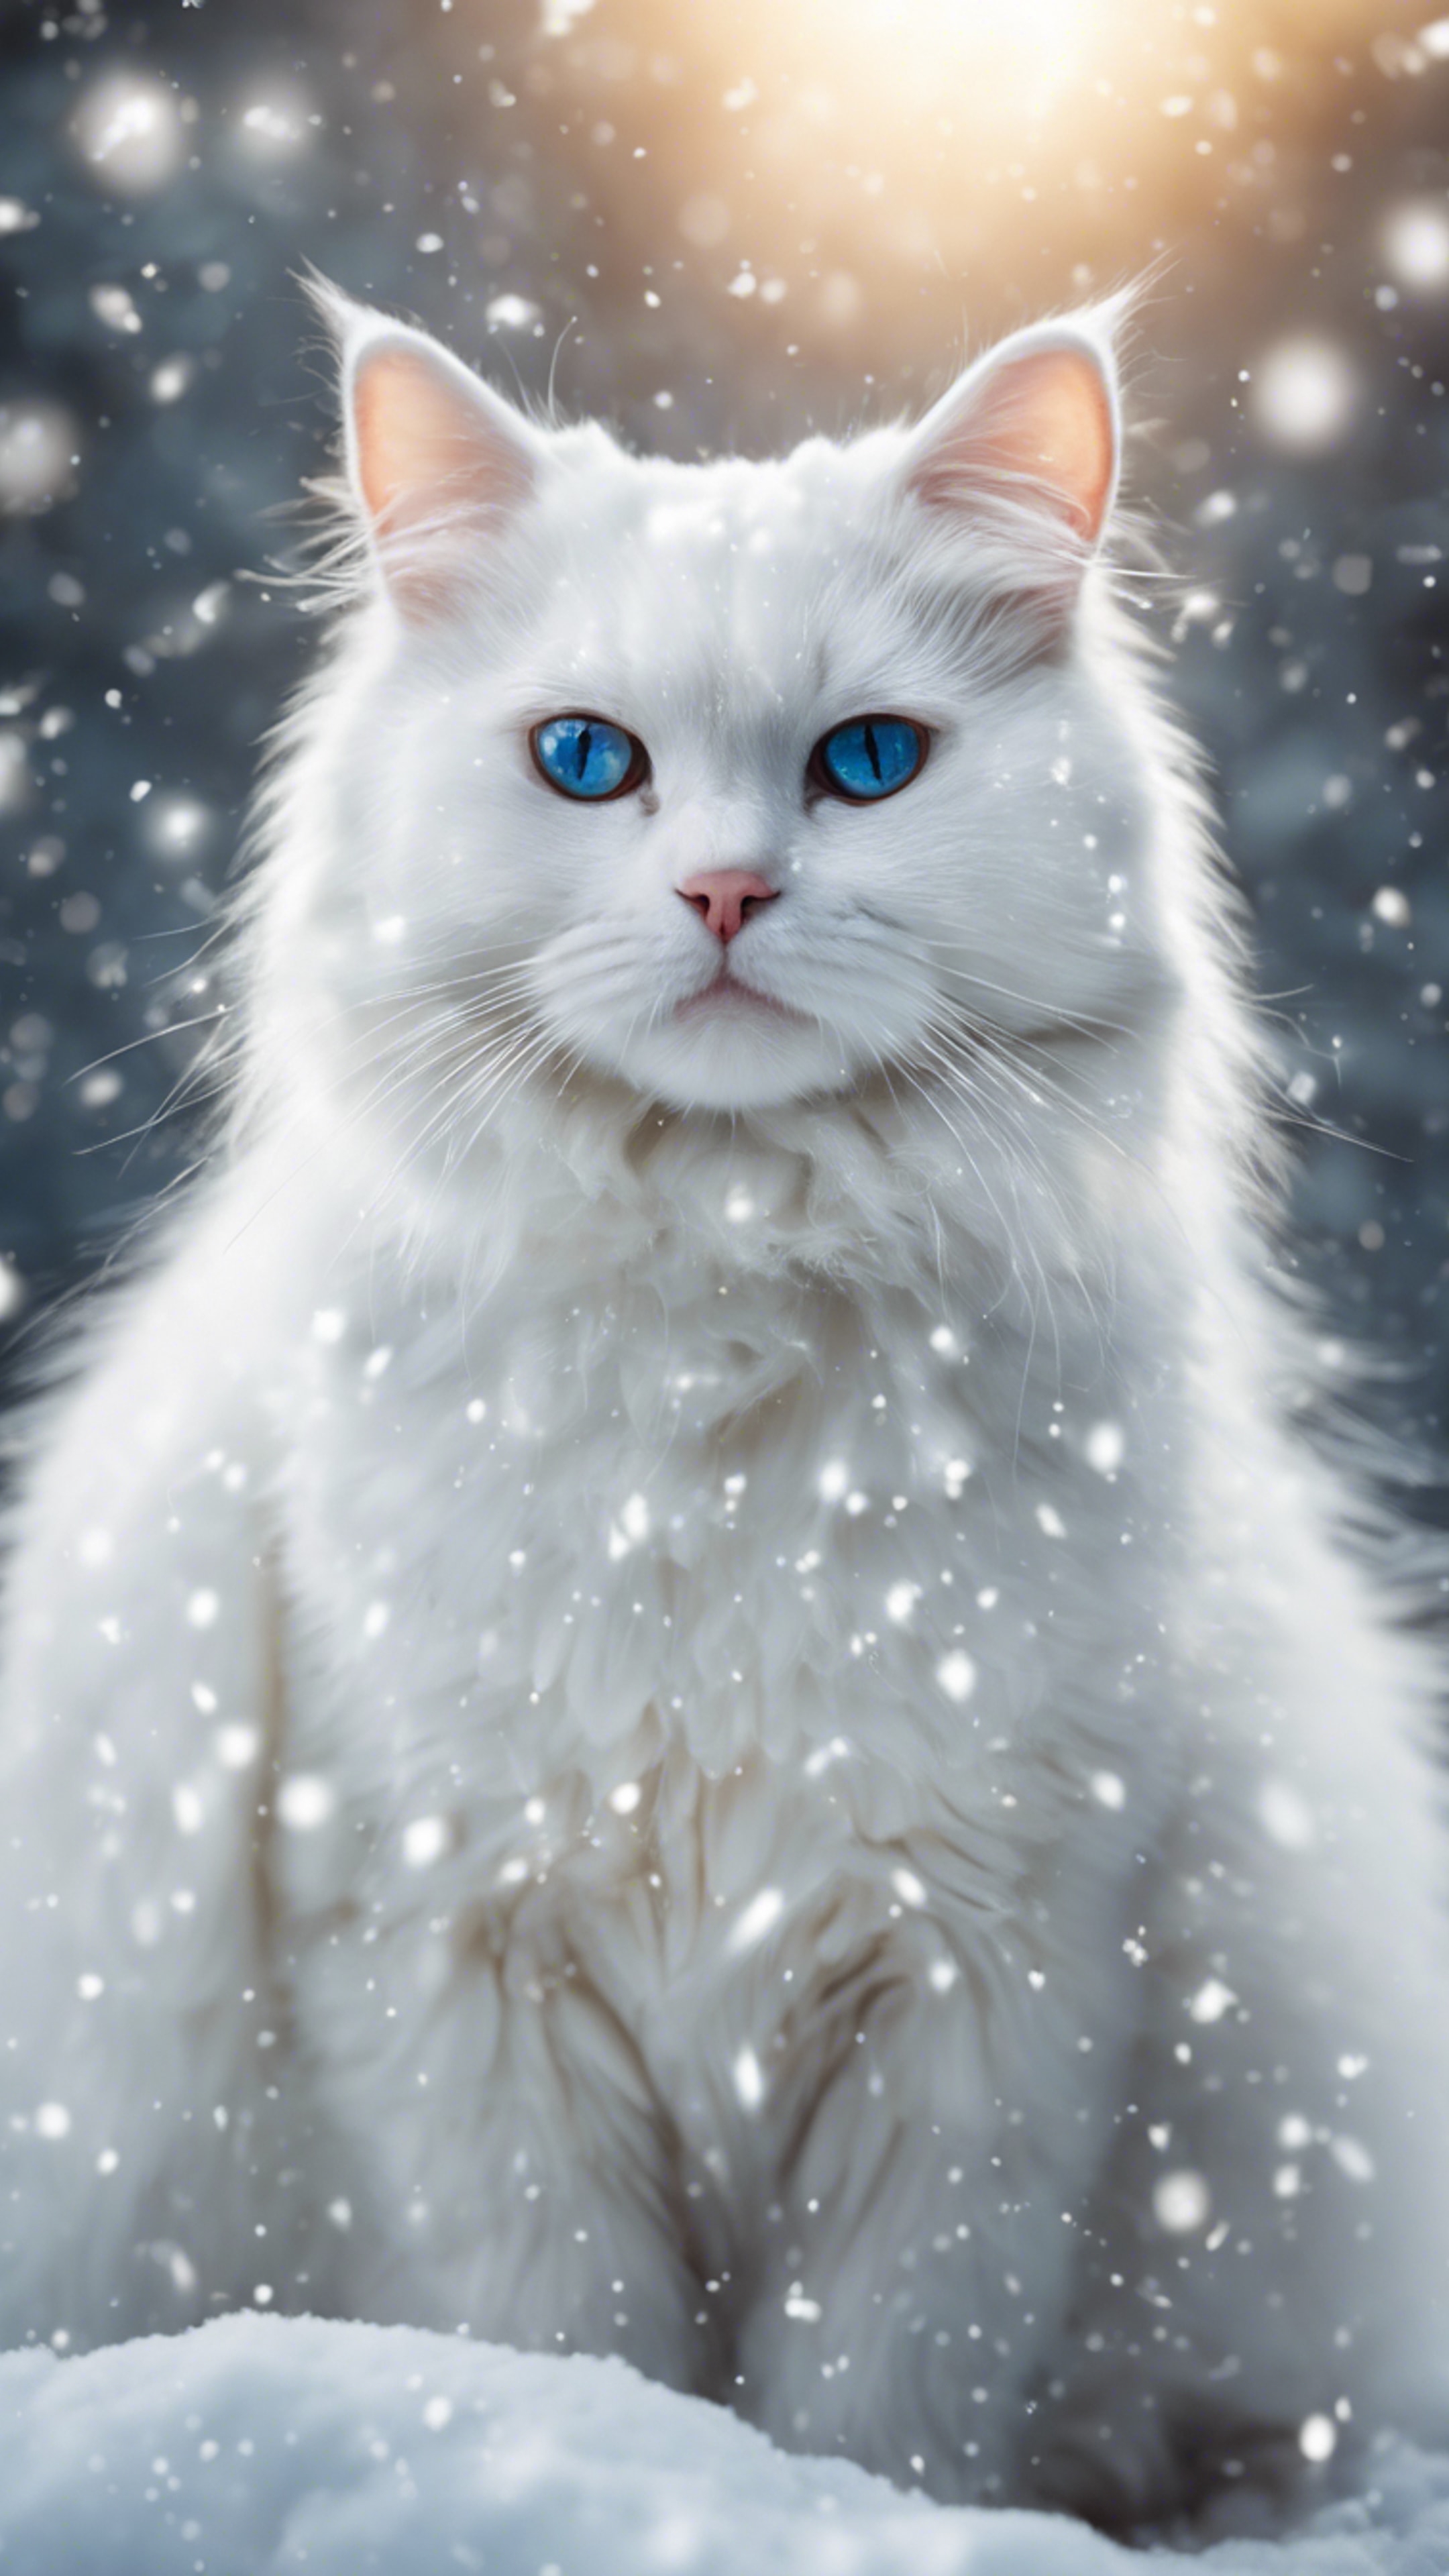 A fluffy white cat in the winter, amidst falling snowflakes. Tapeta[a246cb8c0cd2485b96c3]